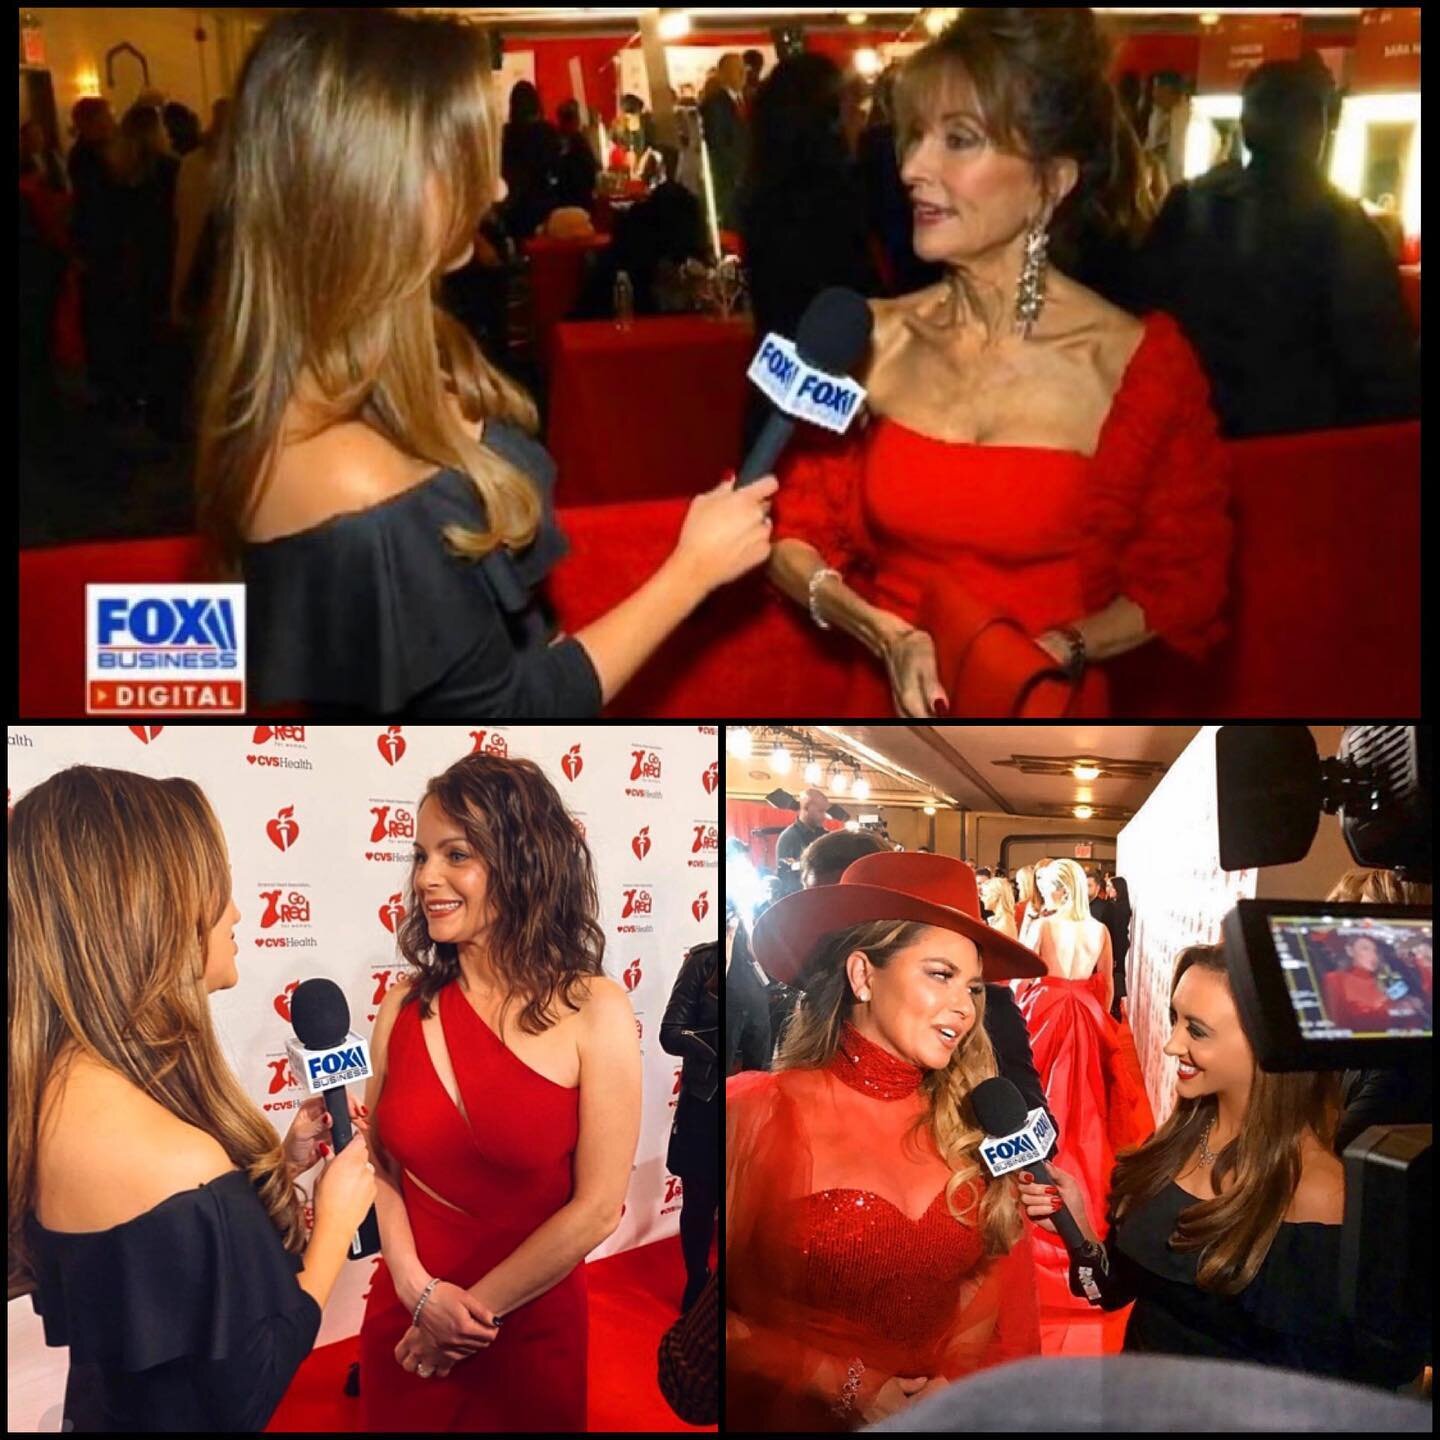 Happy National #WearRedDay! Share a pic using that hashtag to show support while raising awareness for heart disease- the #1 killer of women in the U.S. Here&rsquo;s a #throwback to last year February interviewing Shania Twain, Kimberly Williams-Pais